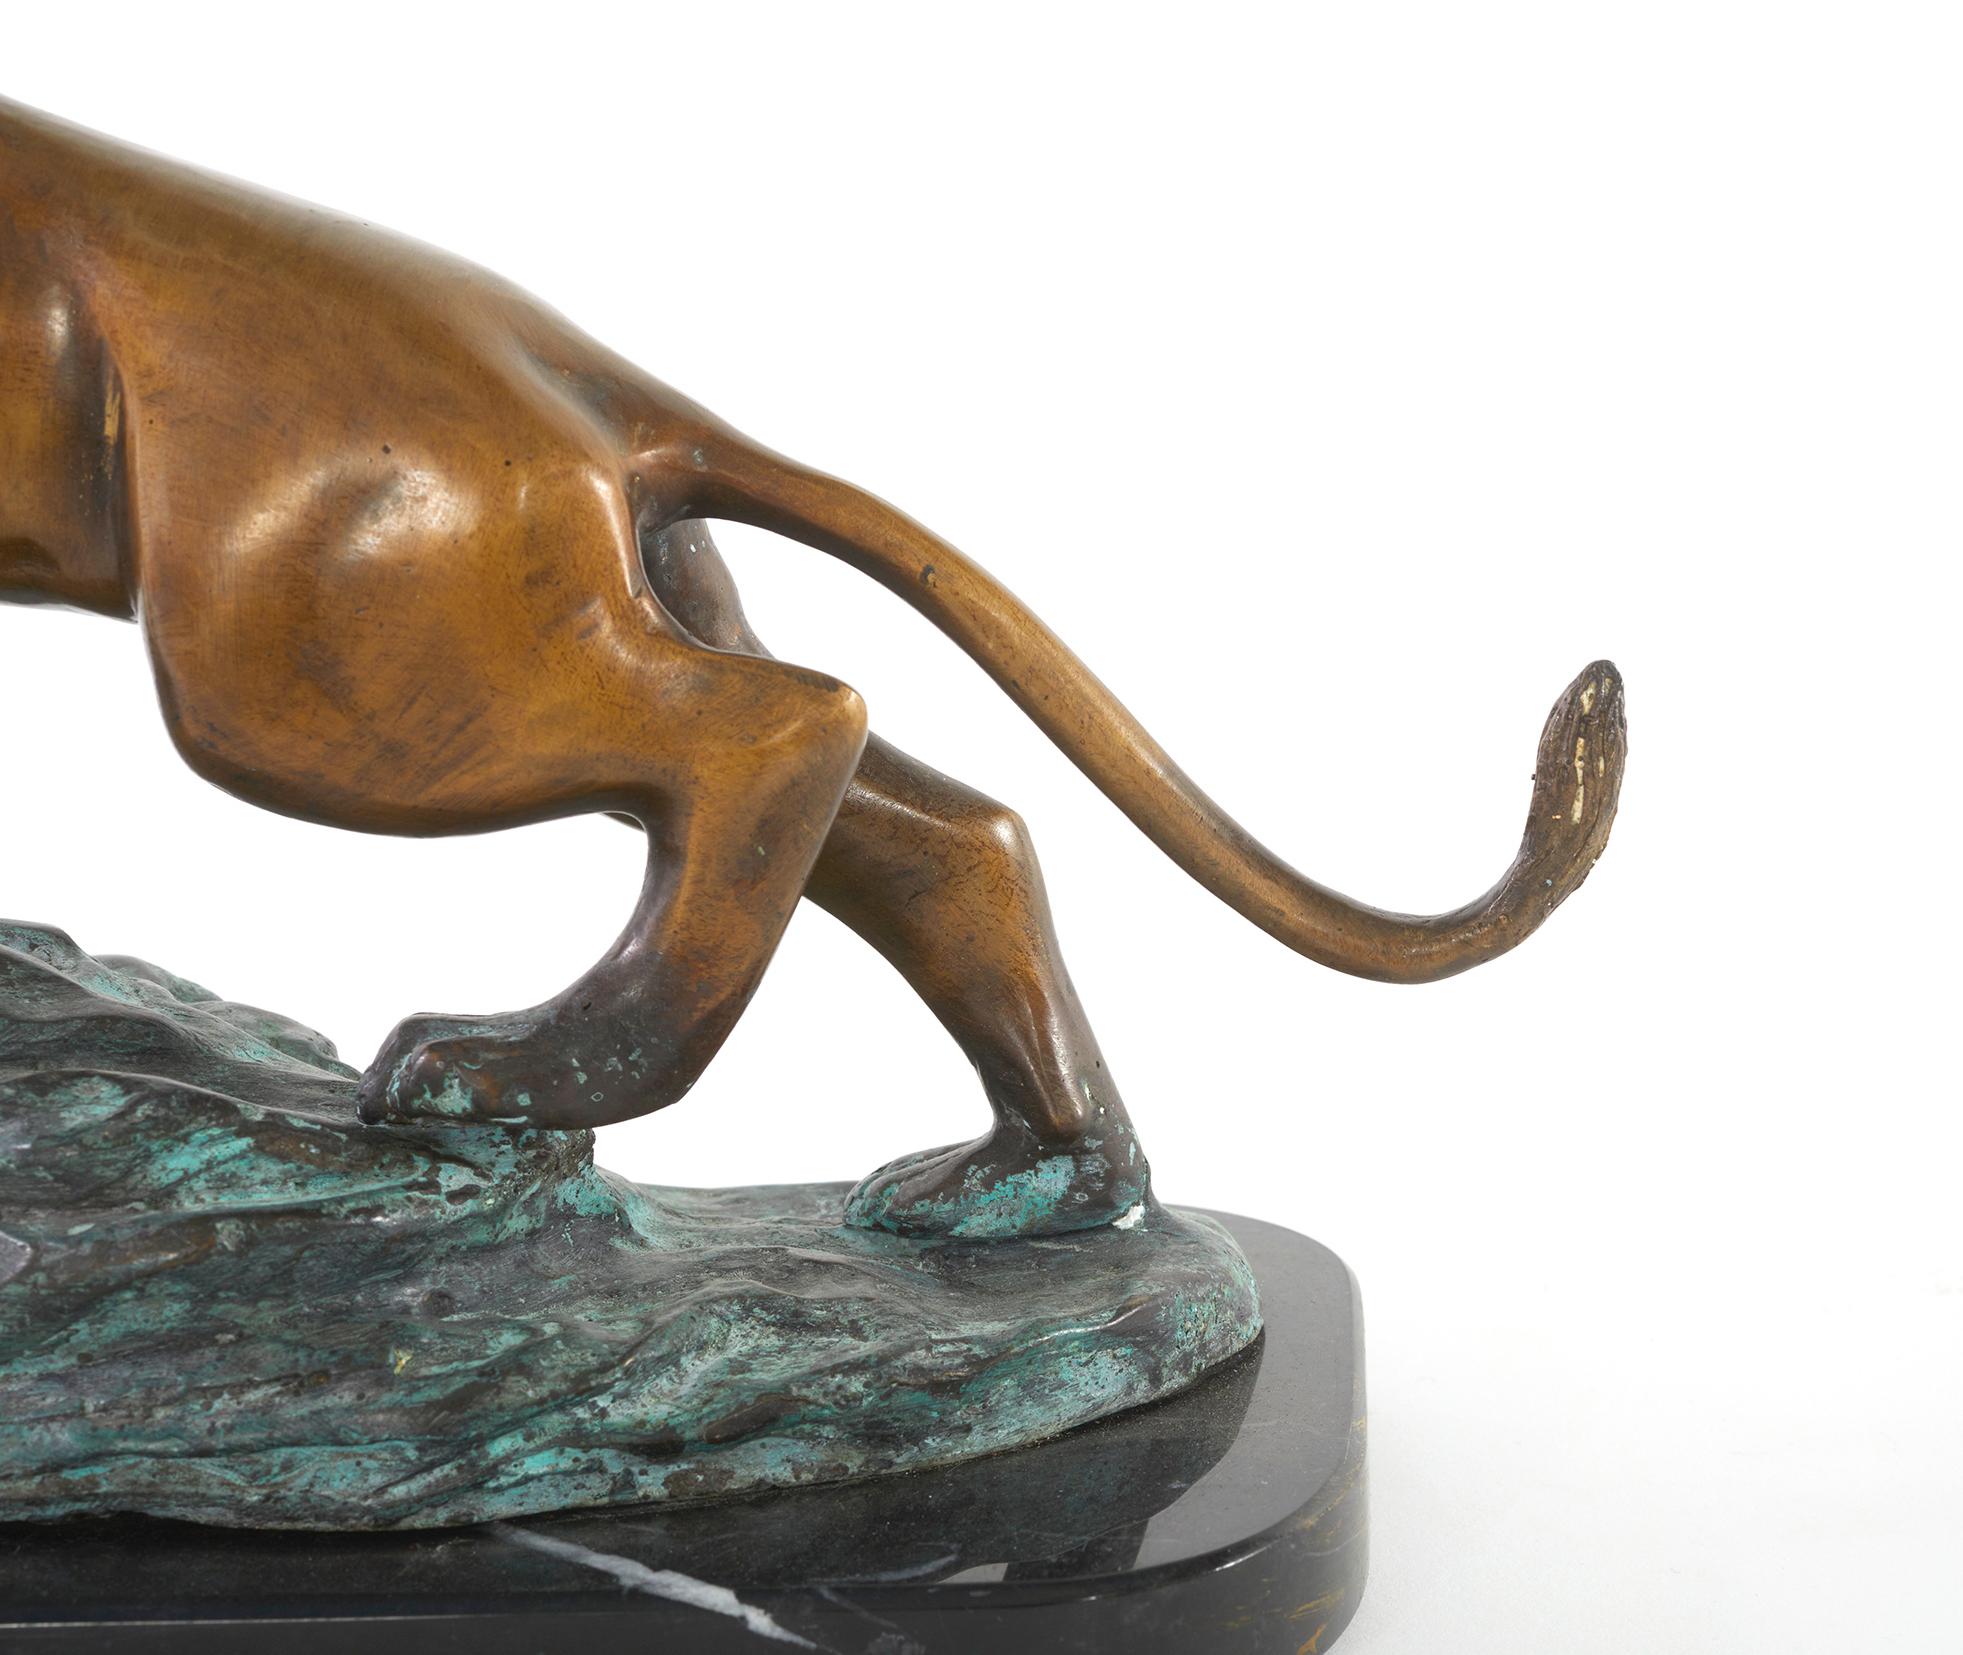 Early 20th century Art Nouveau style gilt bronze / black marble base lion sculpture decorative piece. The piece is in great condition. Minor wear consistent with age / use. Maker's mark inscribed. The piece stand about 11 inches tall X 11.5 inches